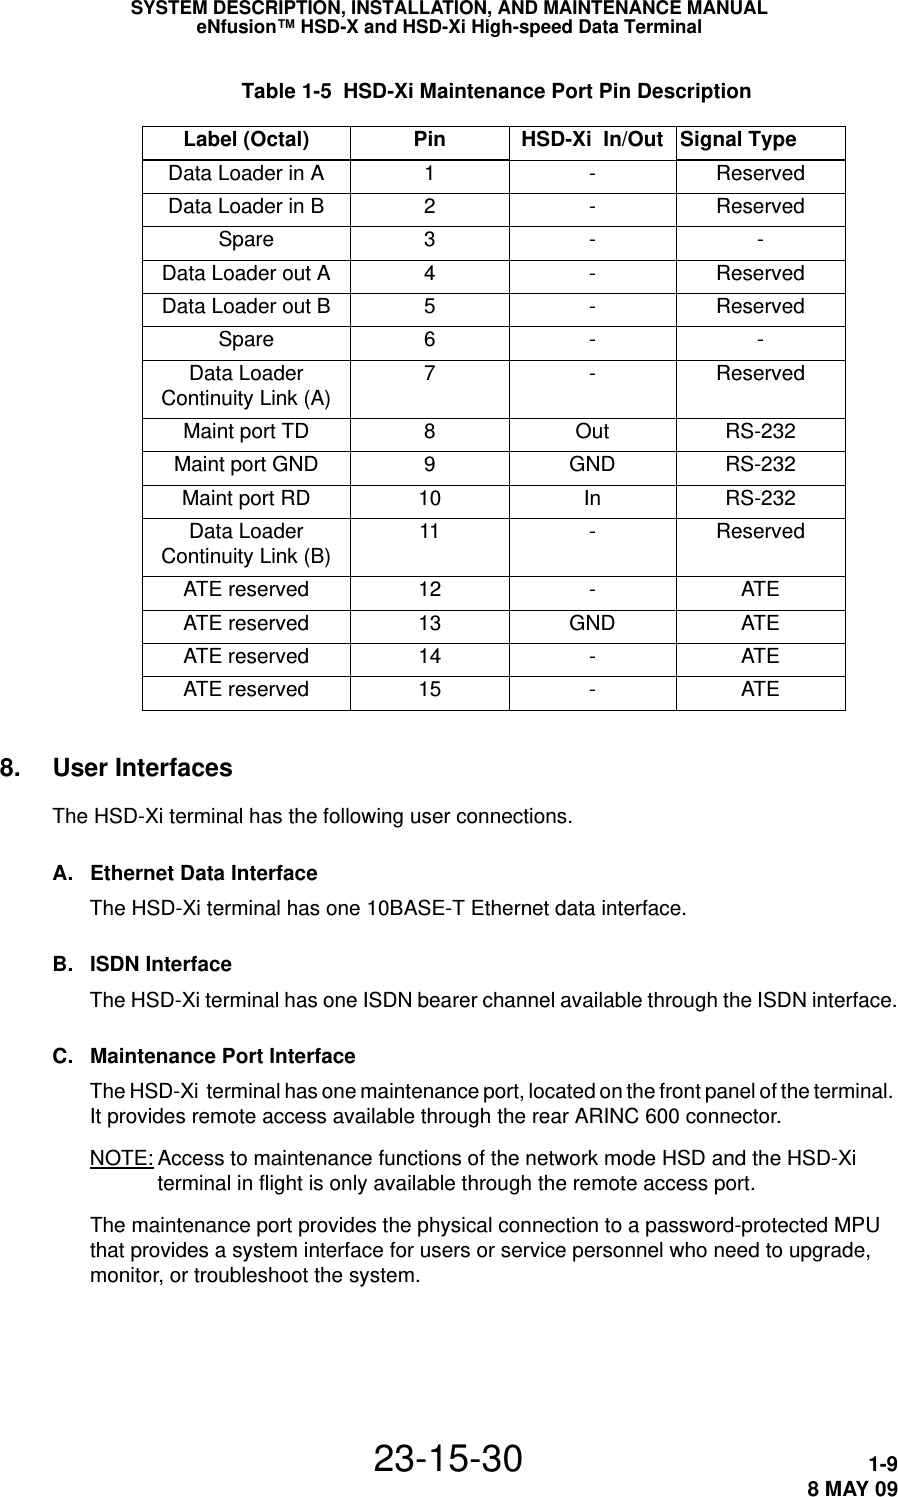 SYSTEM DESCRIPTION, INSTALLATION, AND MAINTENANCE MANUALeNfusion™ HSD-X and HSD-Xi High-speed Data Terminal23-15-30 1-98 MAY 09 Table 1-5  Label (Octal) Pin HSD-Xi  In/Out Signal TypeData Loader in A 1 - ReservedData Loader in B 2 - ReservedSpare 3 - -Data Loader out A 4 - ReservedData Loader out B 5 - ReservedSpare 6 - -Data Loader Continuity Link (A) 7 - ReservedMaint port TD 8Out RS-232Maint port GND 9GND RS-232Maint port RD 10 In RS-232Data Loader Continuity Link (B) 11 -ReservedATE reserved 12 -ATEATE reserved 13 GND ATEATE reserved 14 -ATEATE reserved 15 -ATEHSD-Xi Maintenance Port Pin Description8. User InterfacesThe HSD-Xi terminal has the following user connections.A. Ethernet Data InterfaceThe HSD-Xi terminal has one 10BASE-T Ethernet data interface. B. ISDN InterfaceThe HSD-Xi terminal has one ISDN bearer channel available through the ISDN interface.C. Maintenance Port Interface The HSD-Xi  terminal has one maintenance port, located on the front panel of the terminal. It provides remote access available through the rear ARINC 600 connector.NOTE: Access to maintenance functions of the network mode HSD and the HSD-Xi  terminal in flight is only available through the remote access port.The maintenance port provides the physical connection to a password-protected MPU that provides a system interface for users or service personnel who need to upgrade, monitor, or troubleshoot the system. 